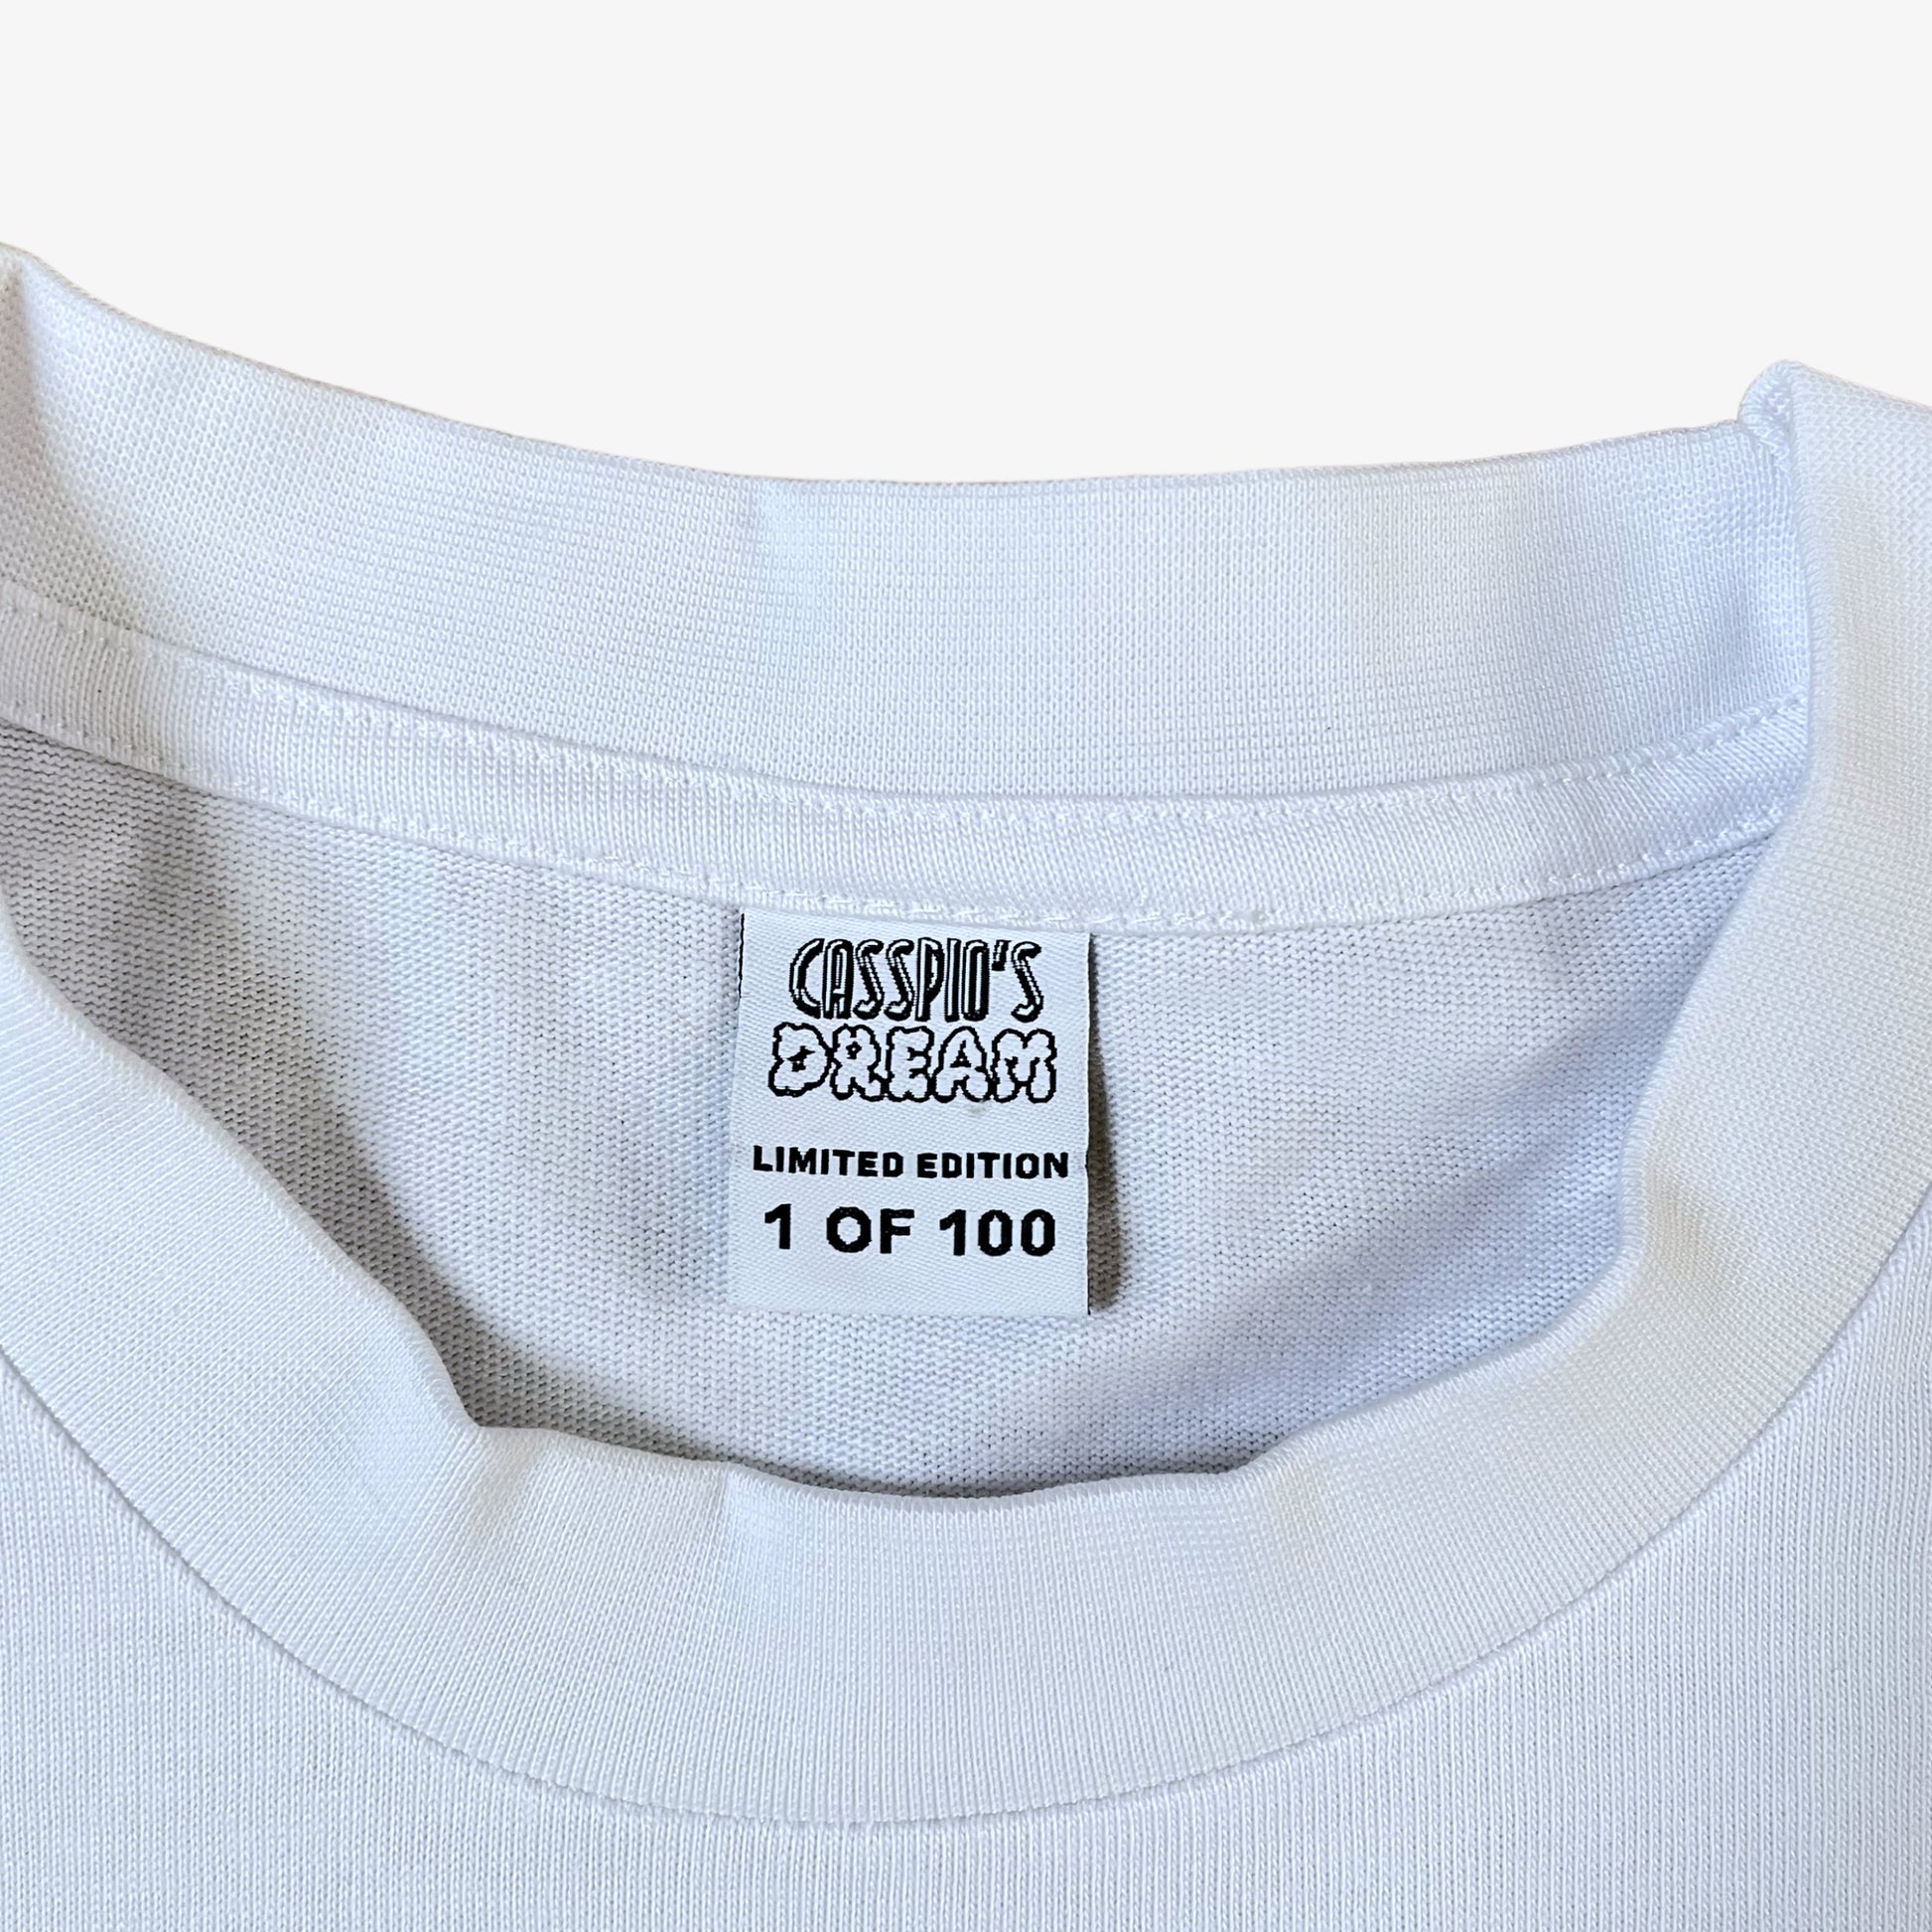 Casspios Dream Limited Edition 1 of 100 Dreamers Never Stop Creating Heavyweight Oversized White Top Label - Casspios Dream